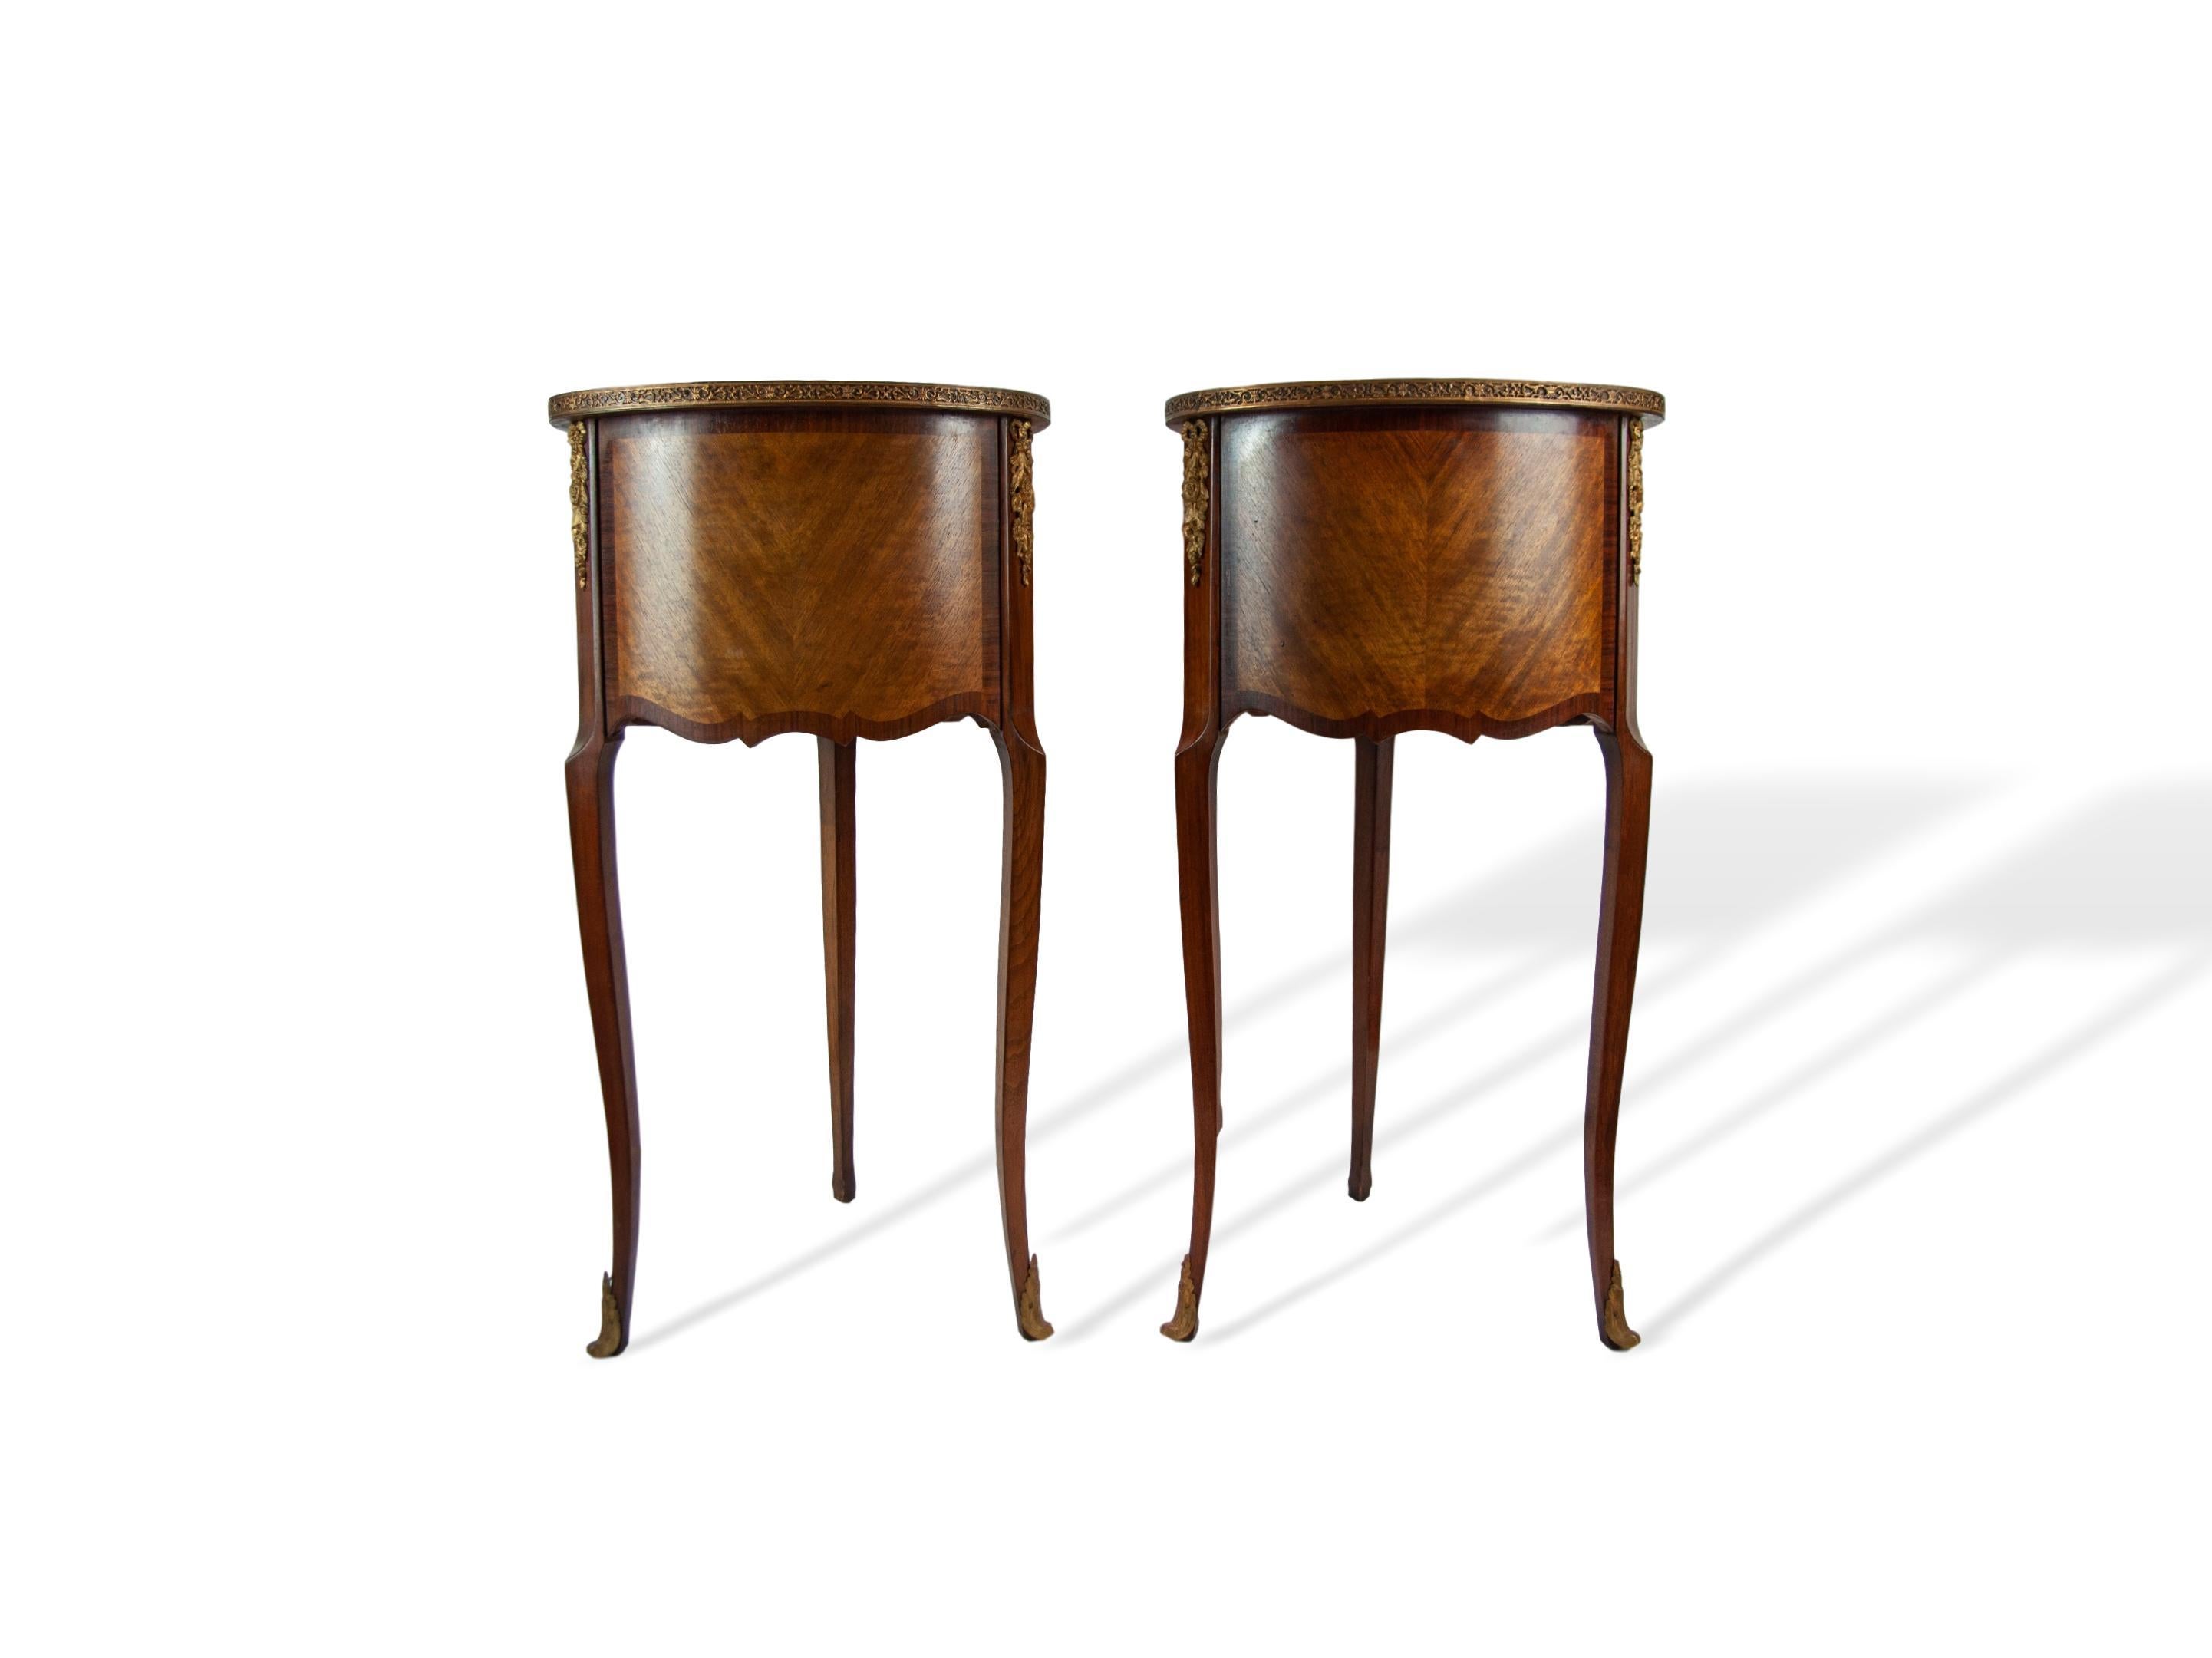 Early 20th Century Pair of Walnut Rosewood Cross-Banded Two-Drawer Side Tables, French, circa 1920